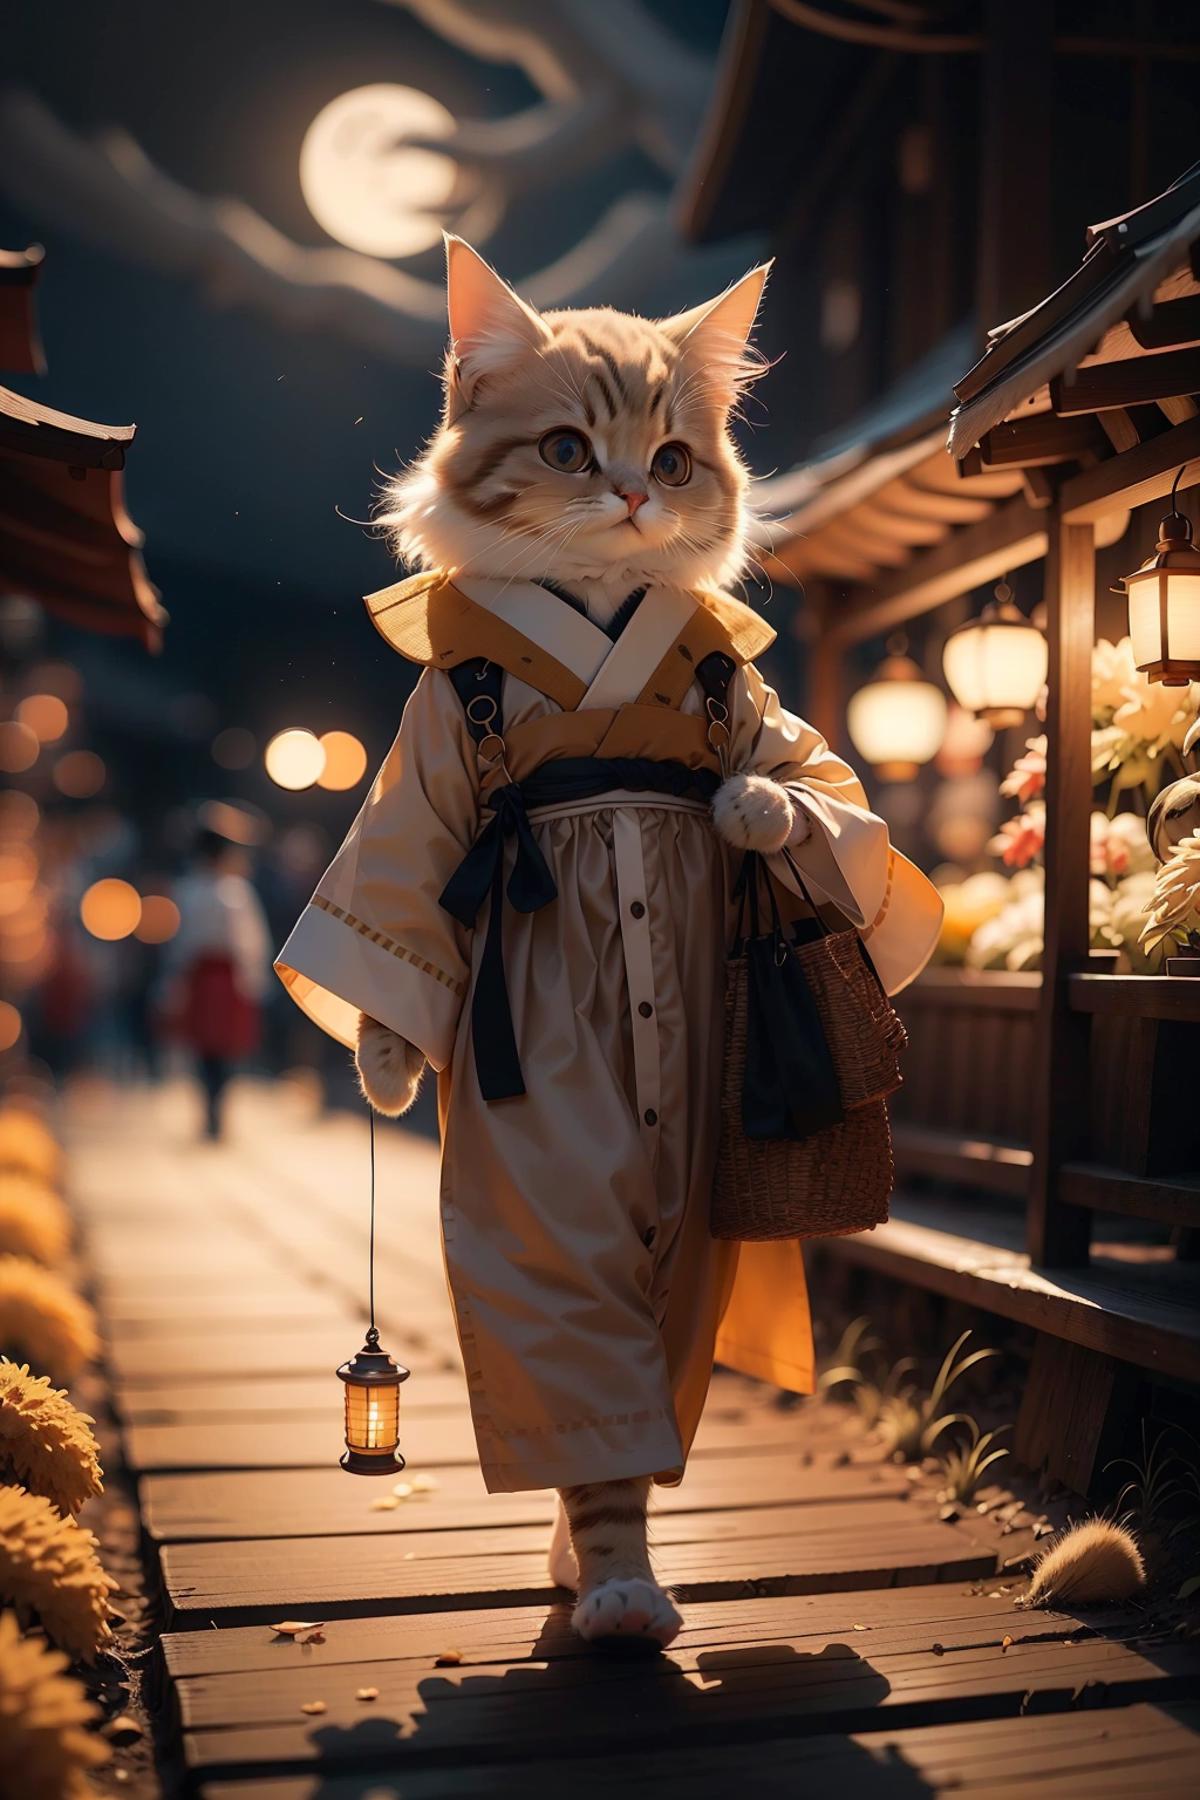 A cat wearing a kimono and holding an umbrella.